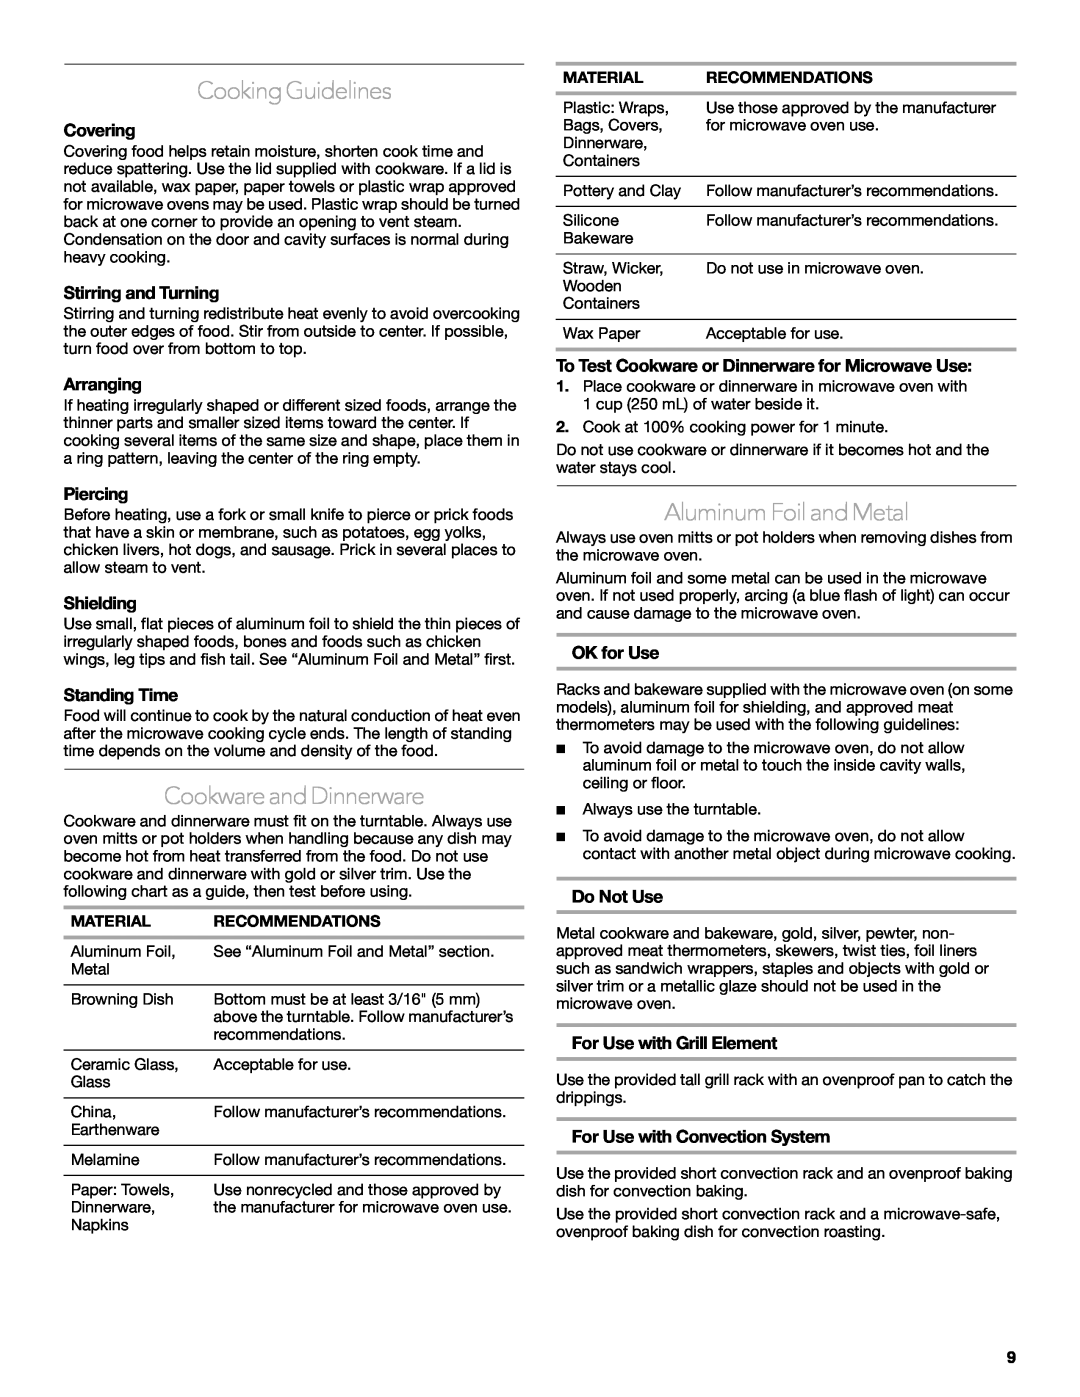 KitchenAid KCMC1575 manual Cooking Guidelines, Cookware and Dinnerware, Aluminum Foil and Metal 